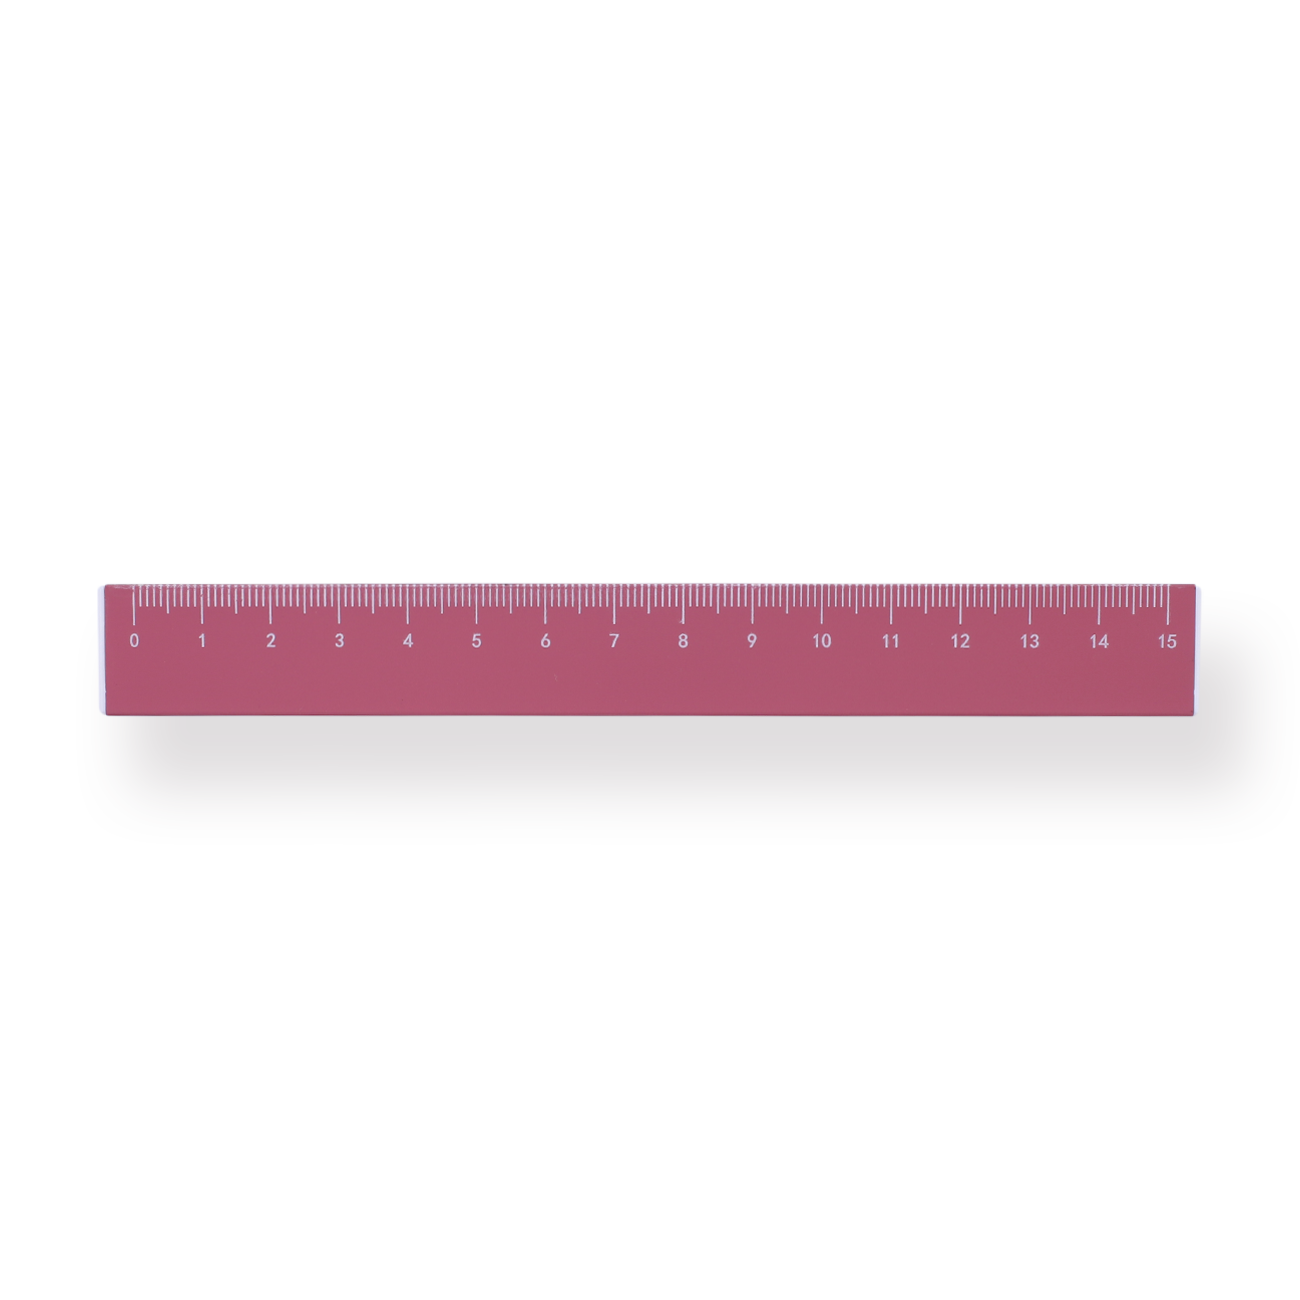 Double Scale Ruler & Pen - Red - Stationery Pal